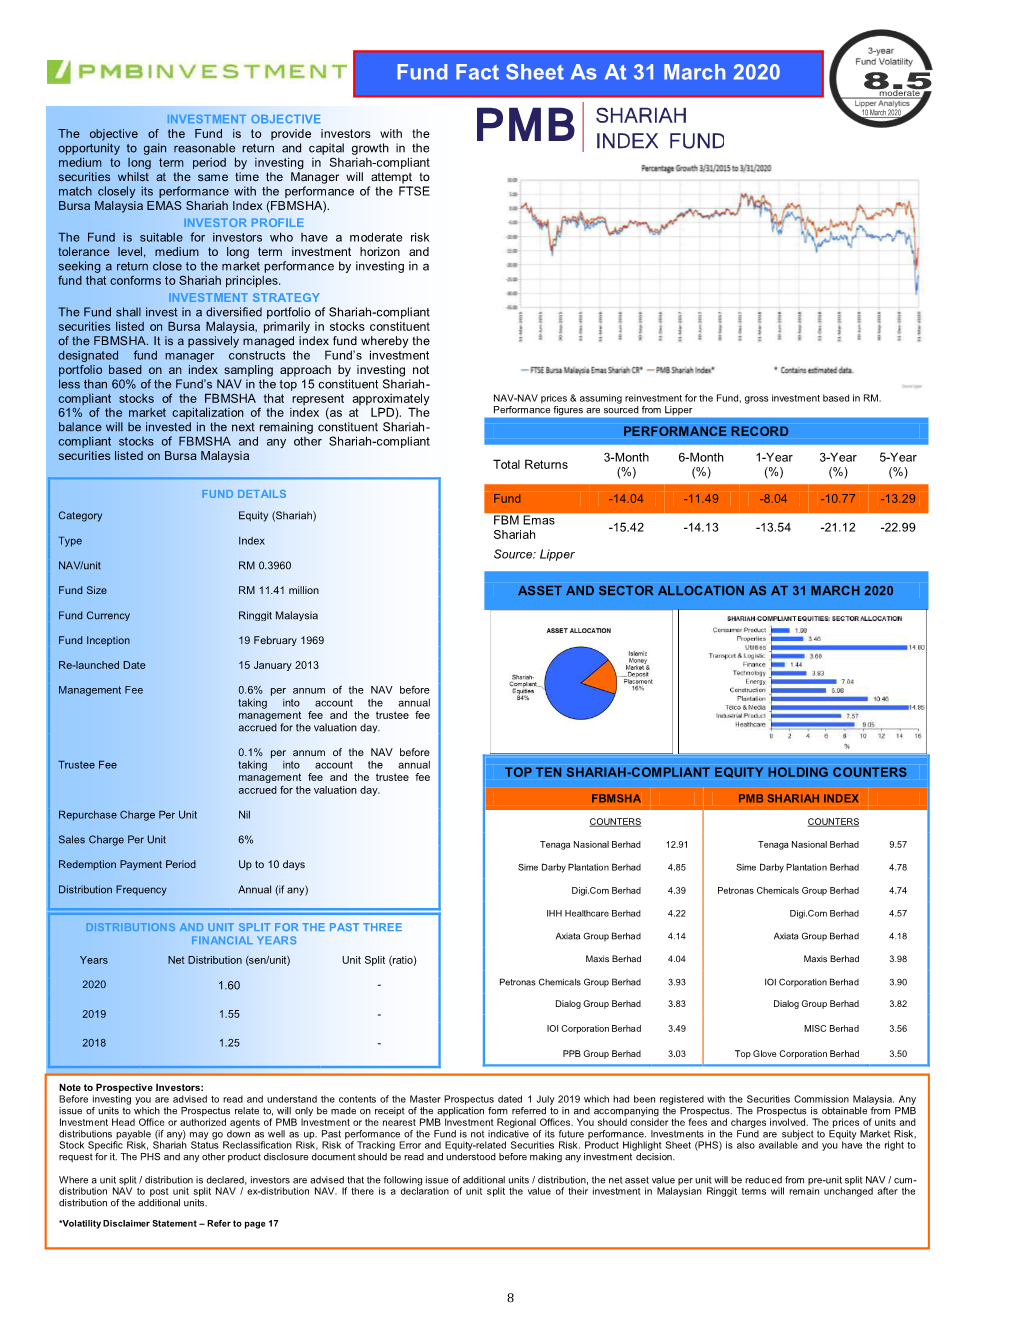 Fund Fact Sheet As at 31 March 2020